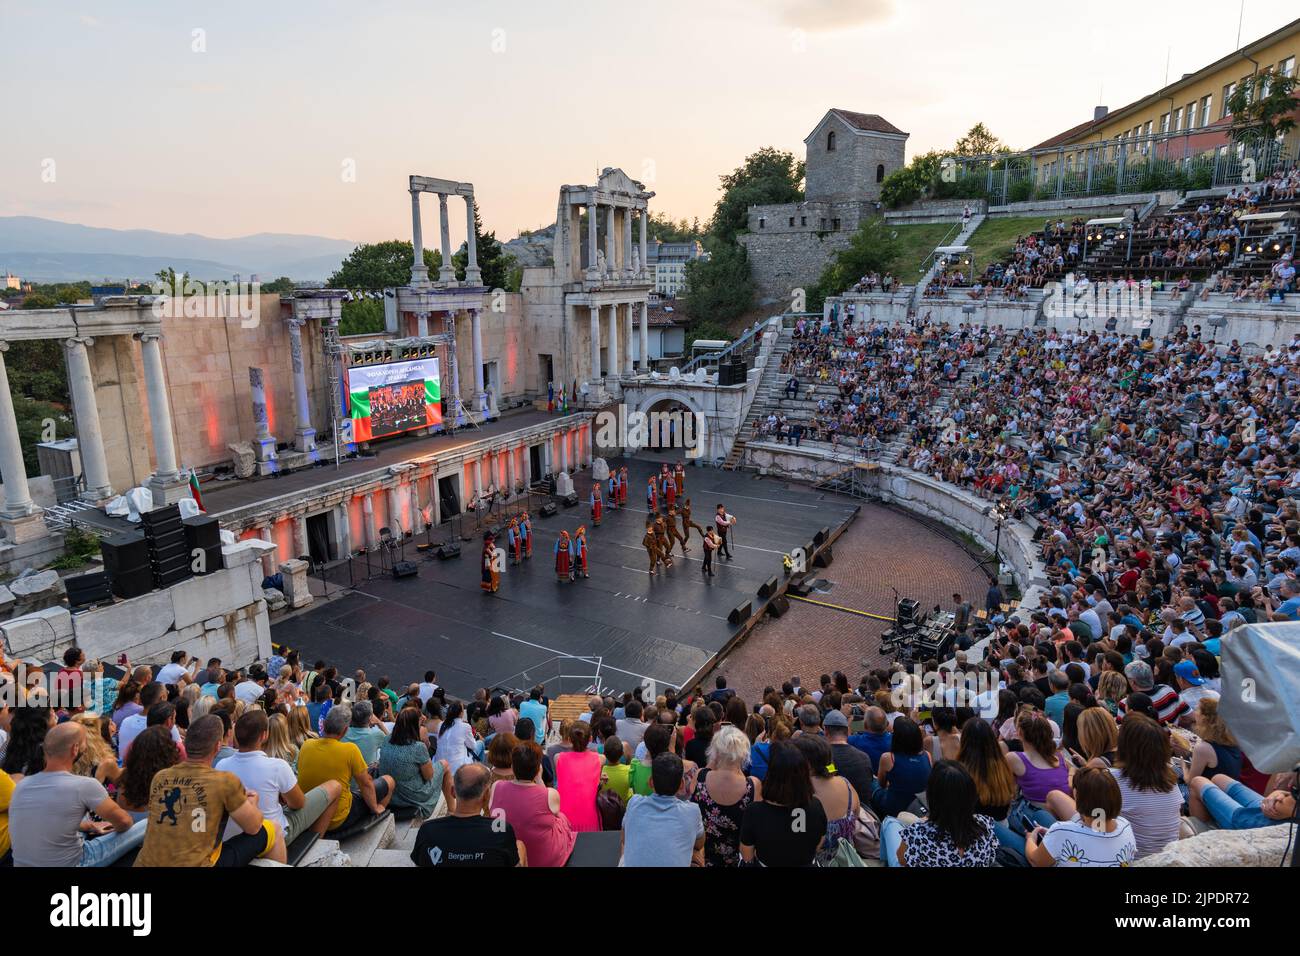 Plovdiv, Bulgaria - July 2022: International Folklore Festival with dance performance on the ancient Roman theater, in Plovdiv, Bulgaria Stock Photo